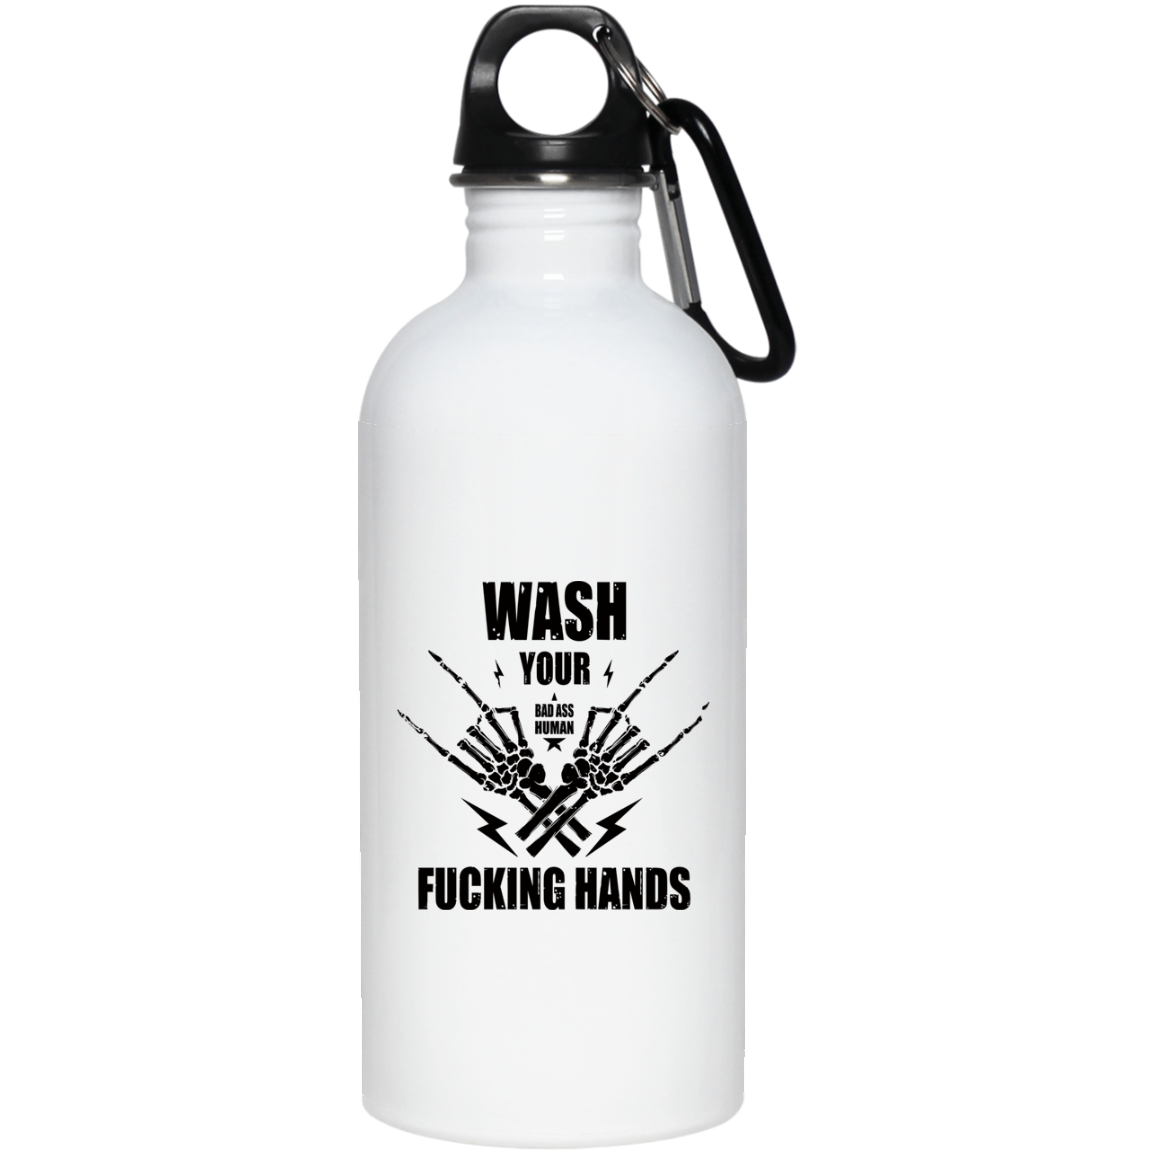 WASH YOUR ROCK HANDS STAINLESS STEEL 20 0Z WATER BOTTLE